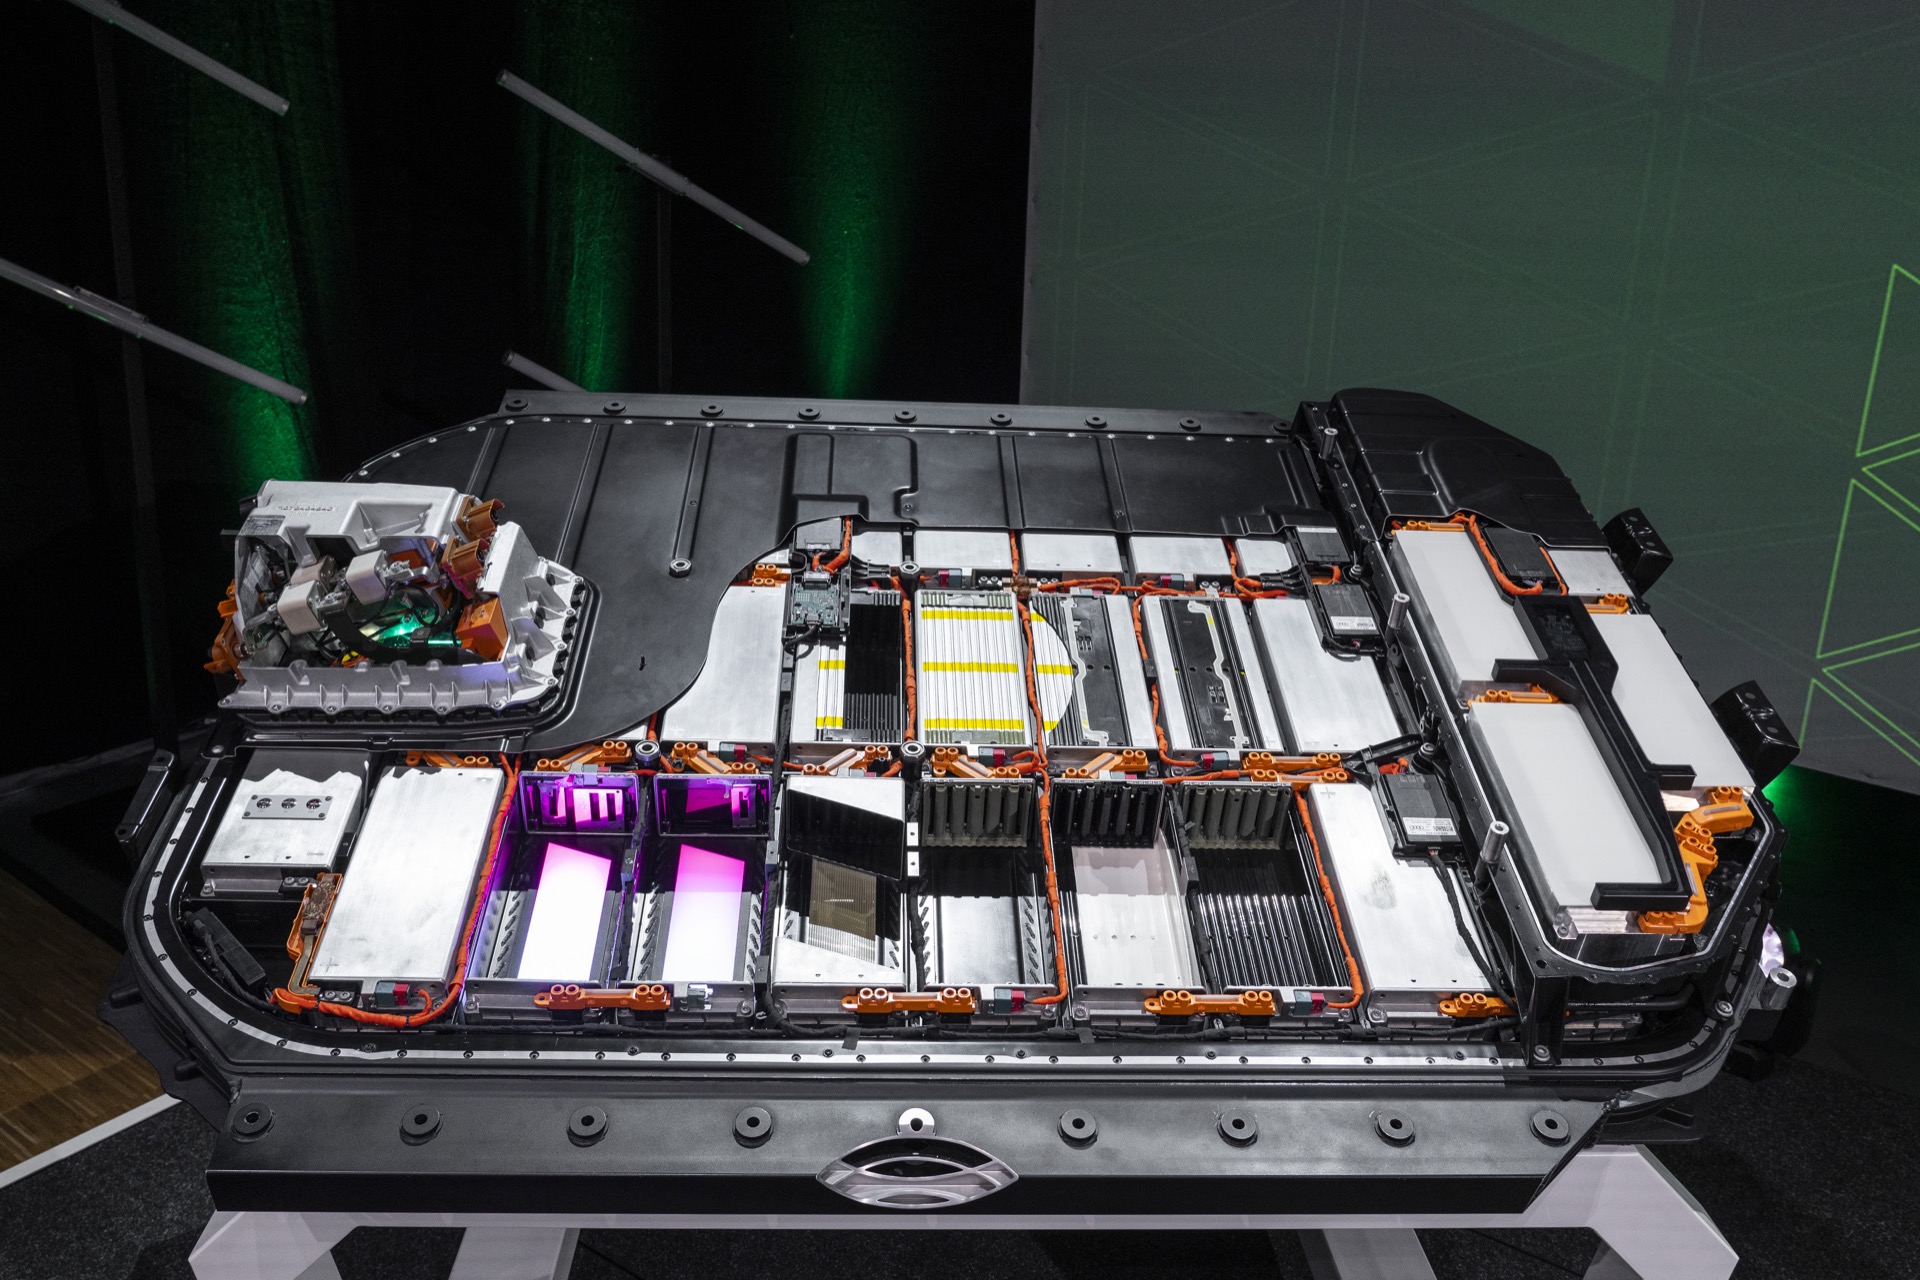 Report: EV battery costs hit another low in 2021, but they might rise in 2022Report: EV battery costs hit another low in 2021, but they might rise in 2022